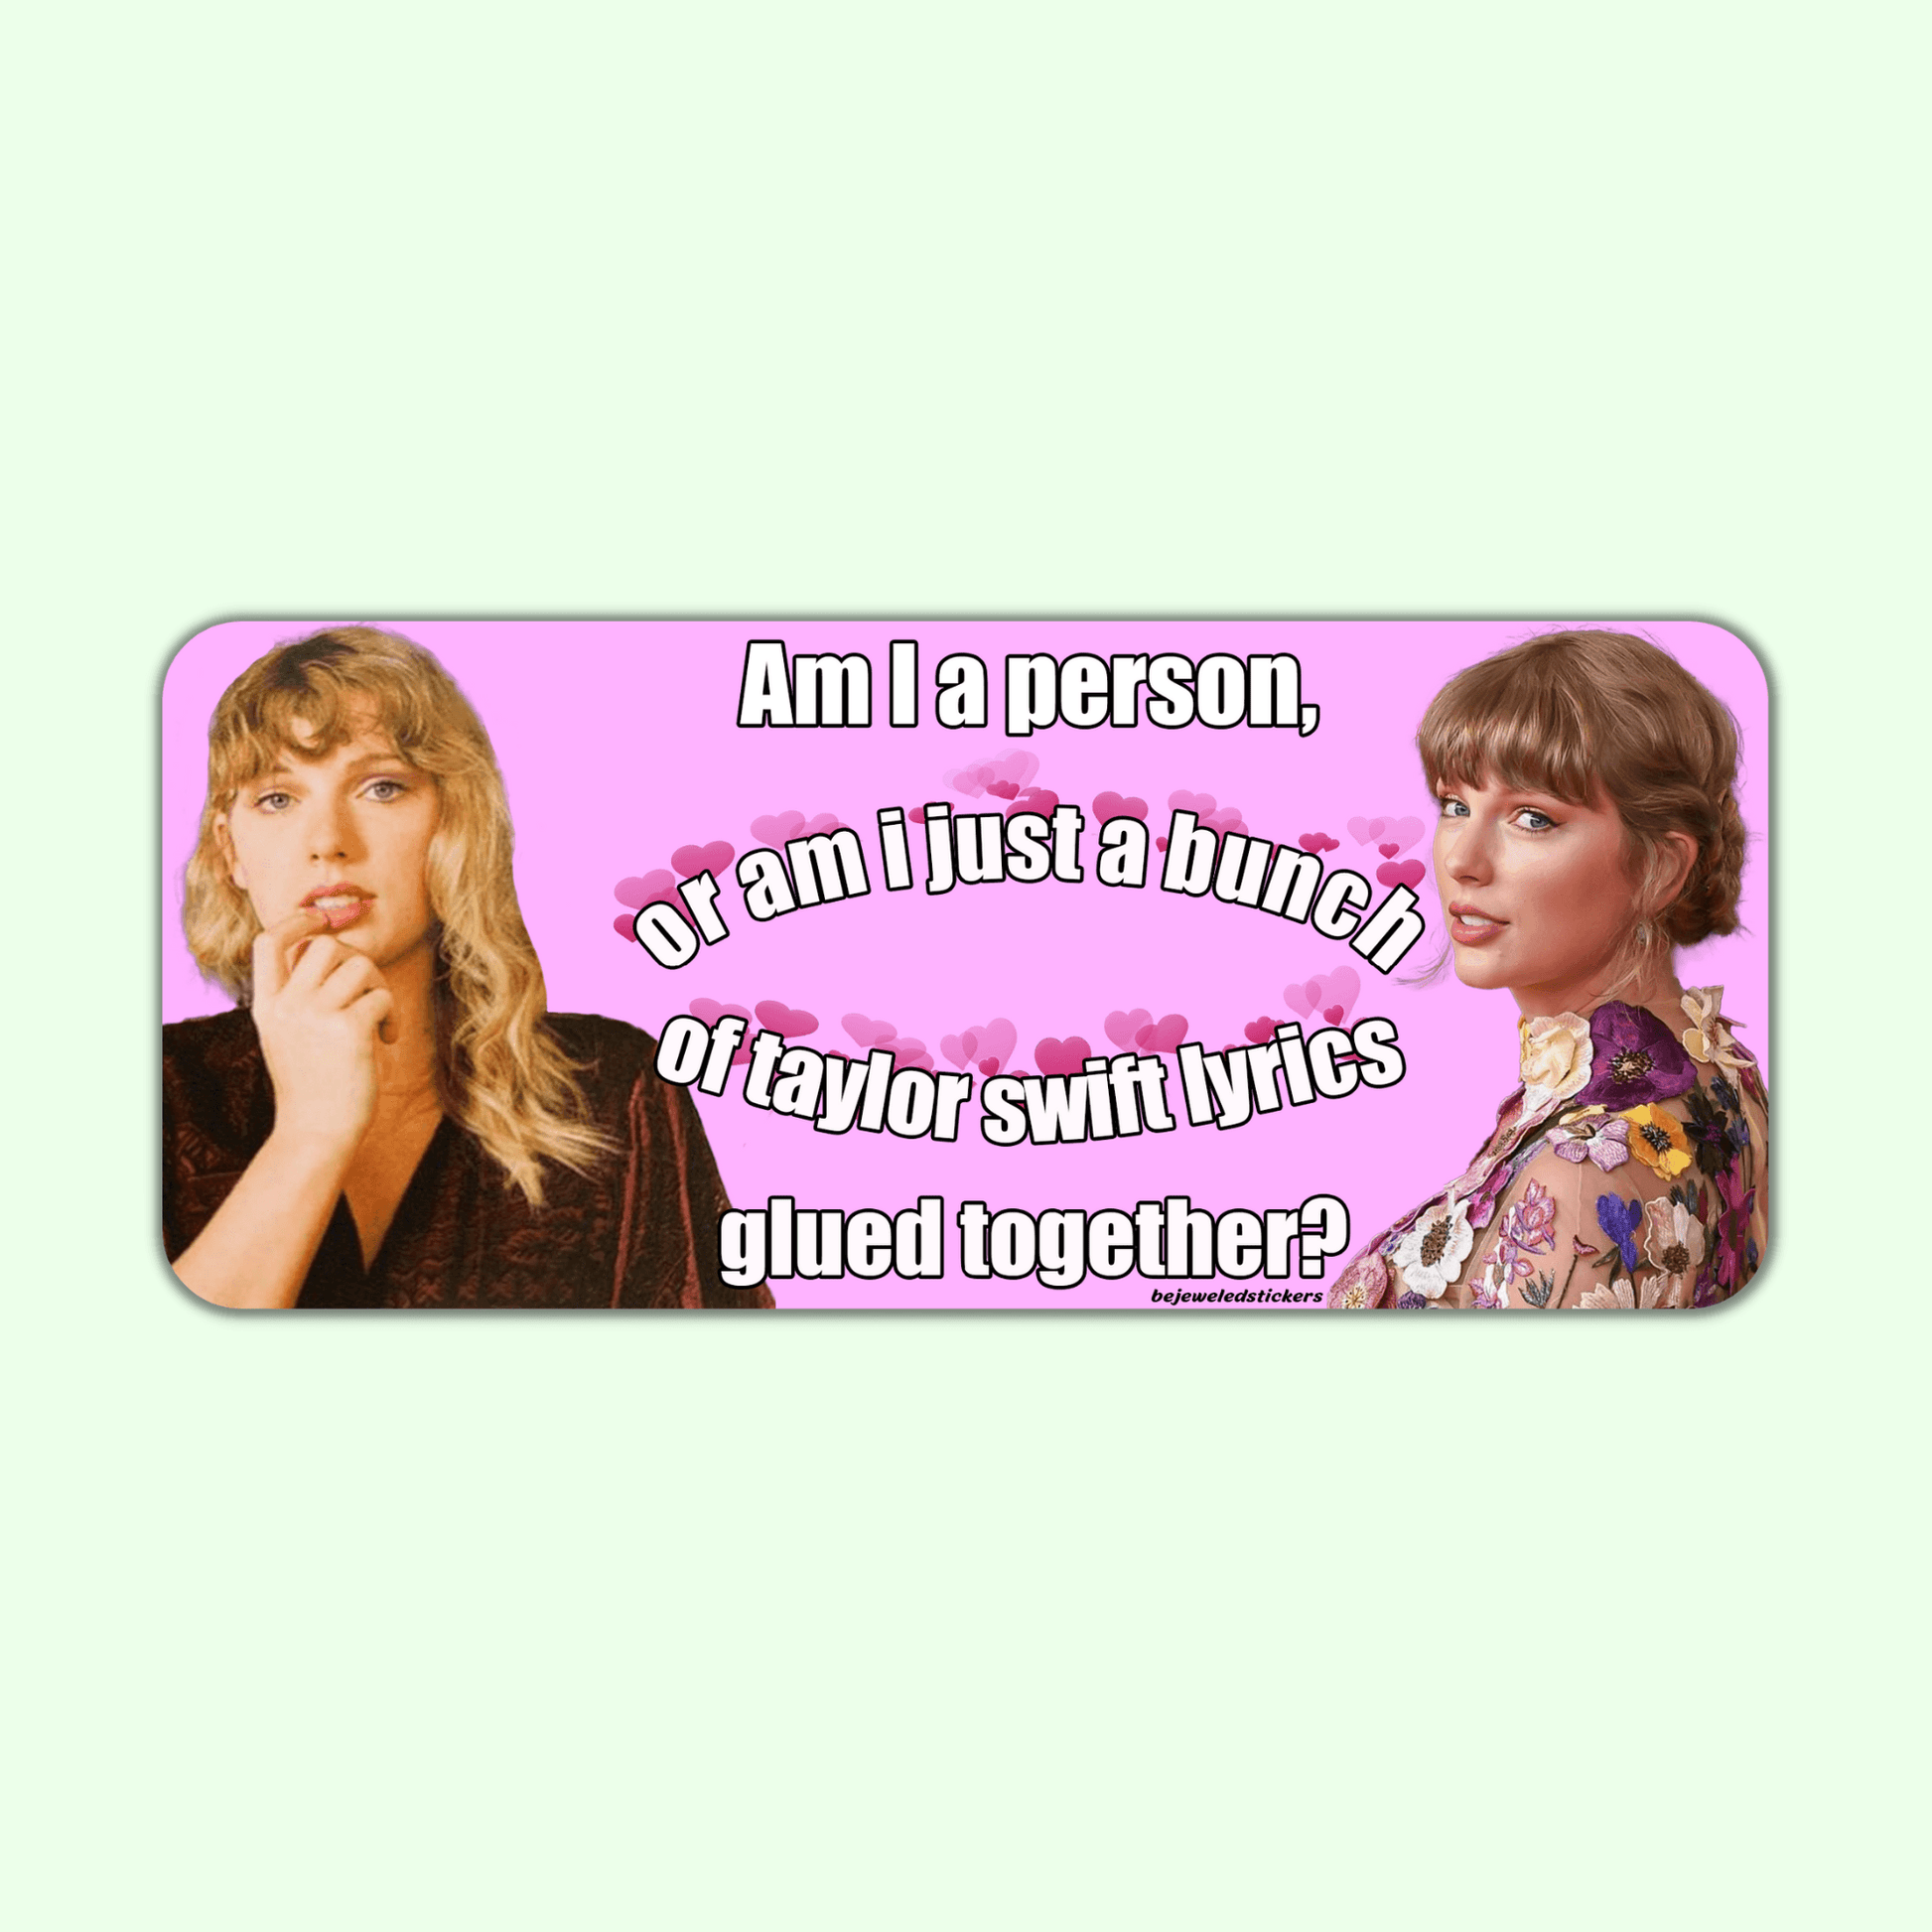 Taylor Swift Stickers for Sale  Taylor swift lyrics, Taylor swift videos,  Taylor swift album